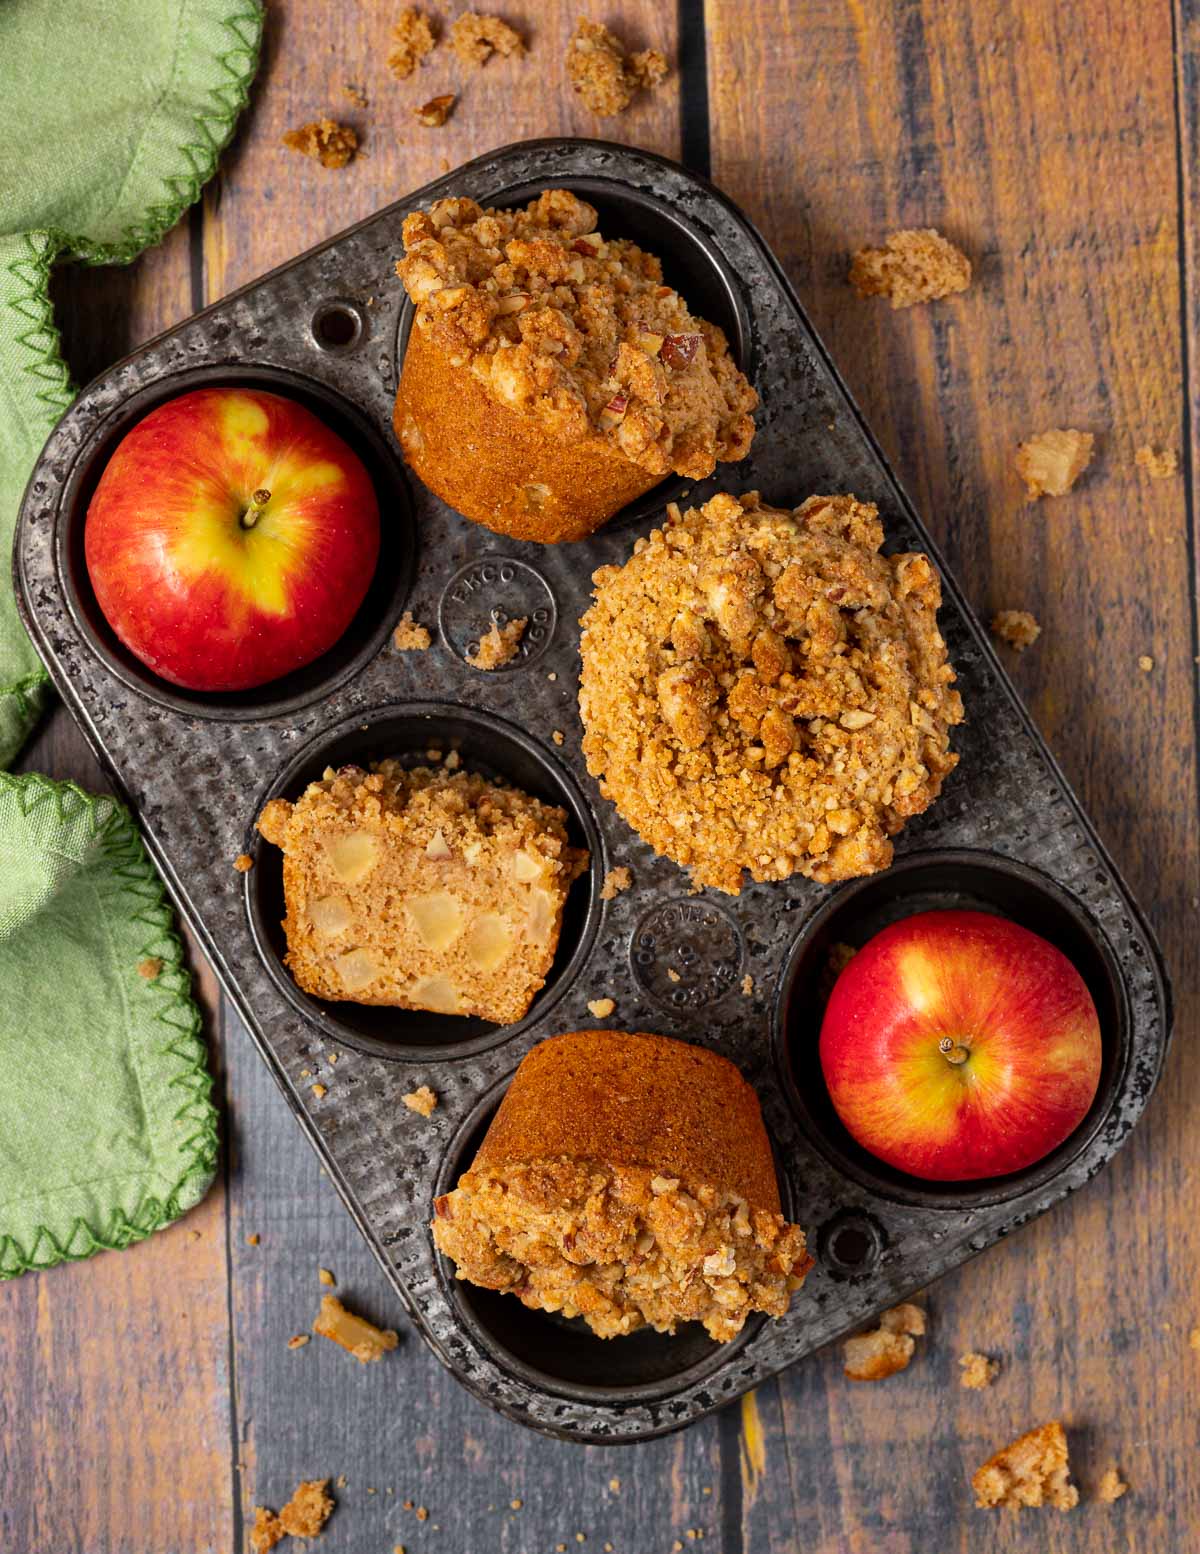 4 muffins and 2 apples in an antique muffin pan